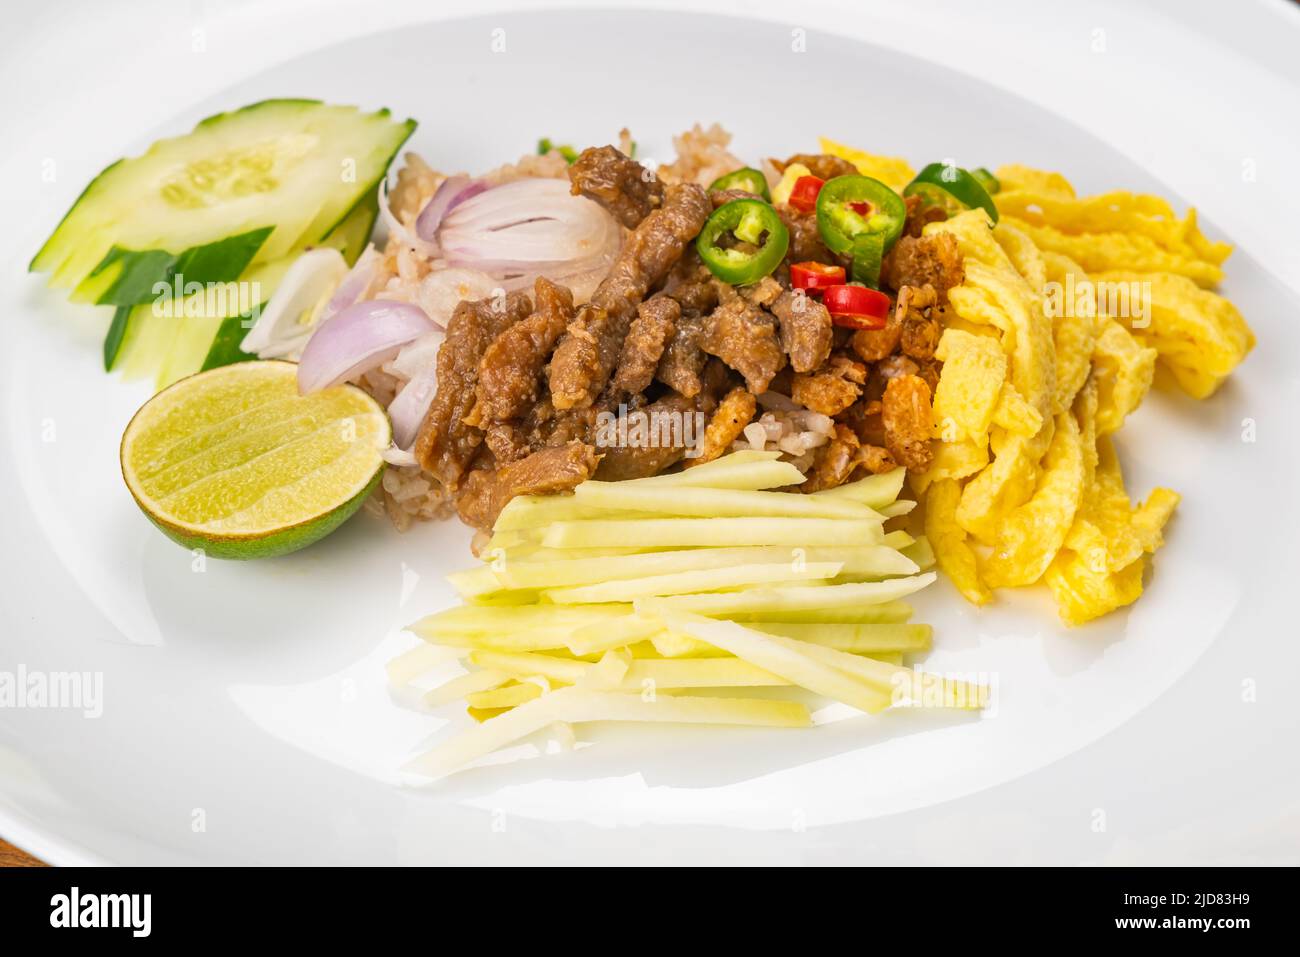 Closeup view of shrimp paste fried rice with sweet pork, half lemon, sliced cucumber, chopped fresh raw mango, sliced onion, fried chicken egg and fre Stock Photo